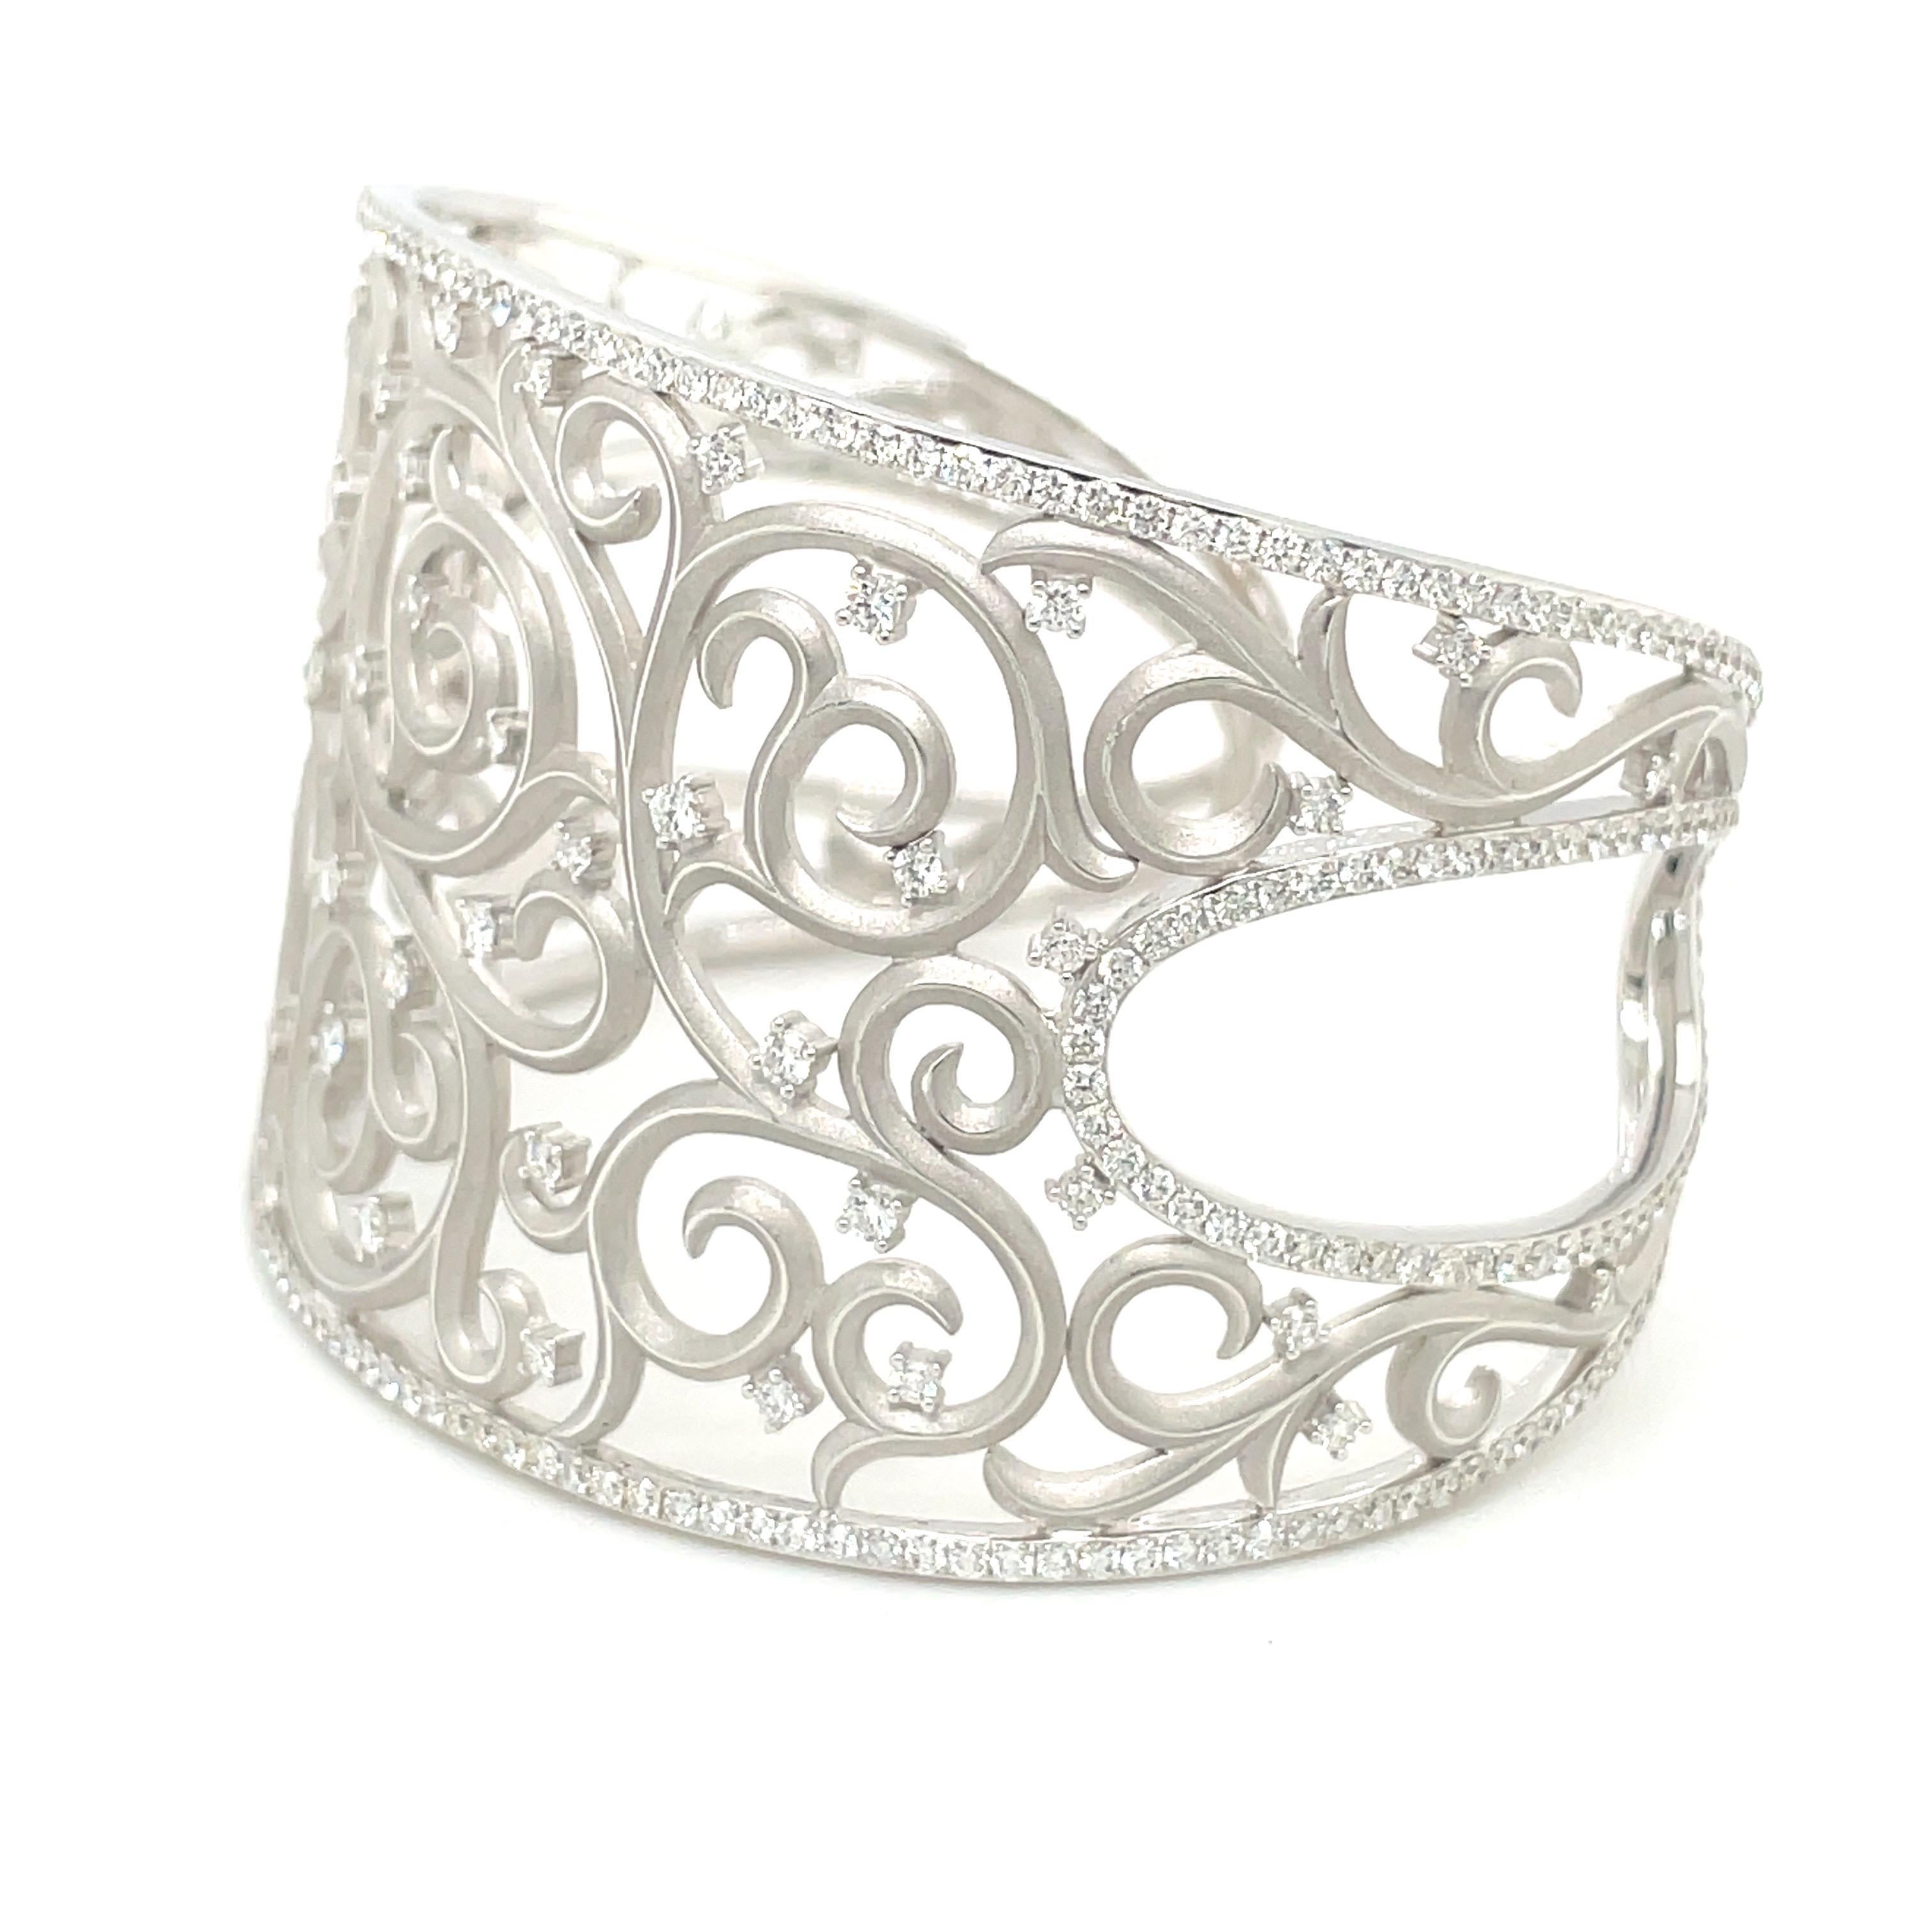 Modern Cellini 18kt White Gold and Diamond 4.90Ct. Lace Cuff Bracelet For Sale